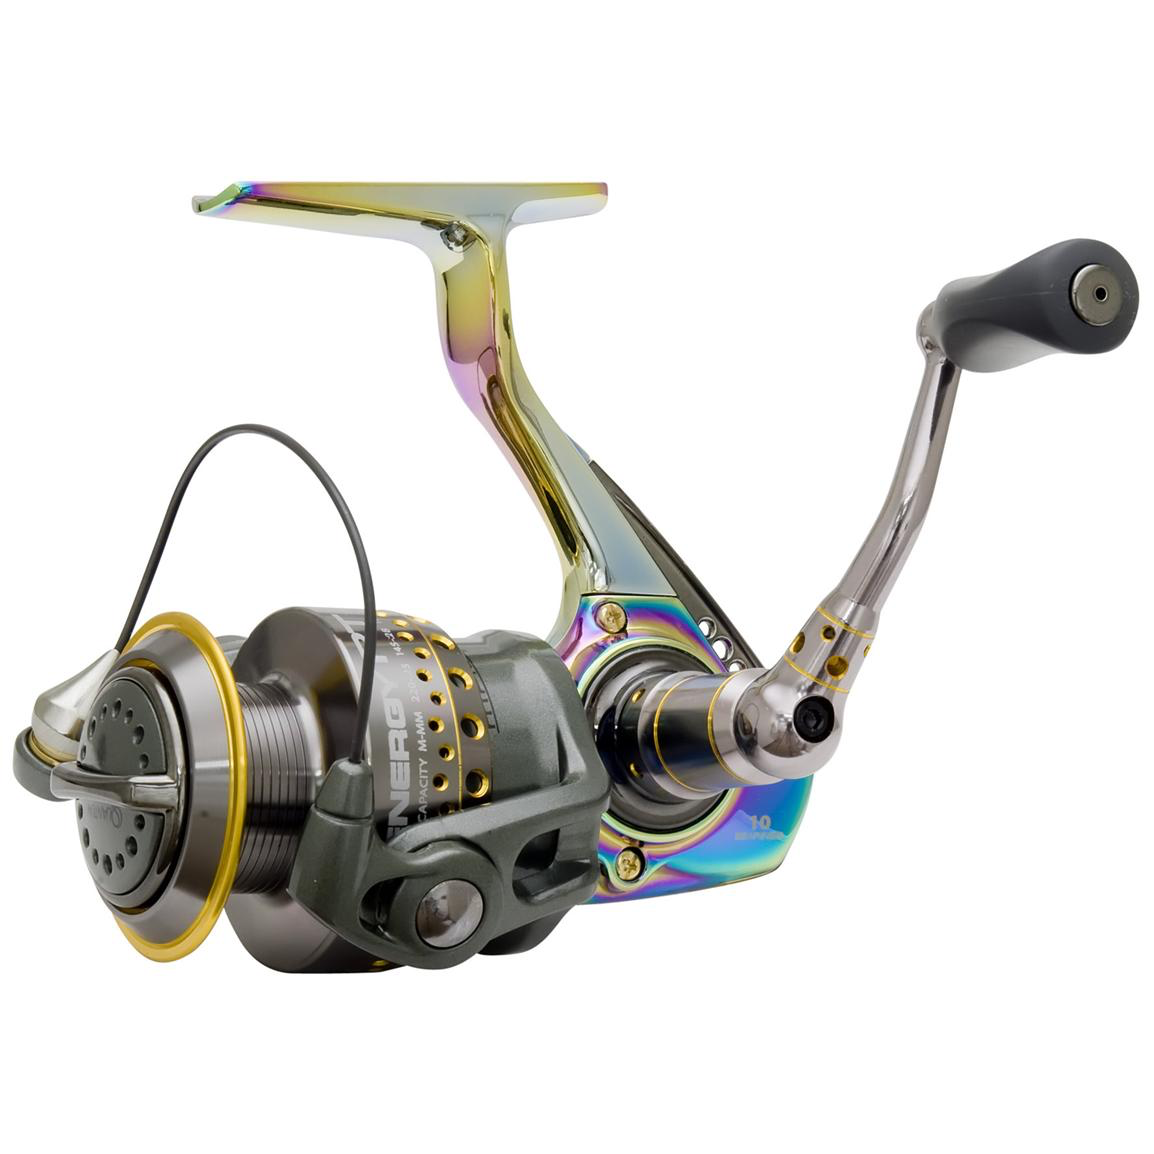 Quantum Reel Reviews - Fishing Rods, Reels, Line, and Knots - Bass Fishing  Forums